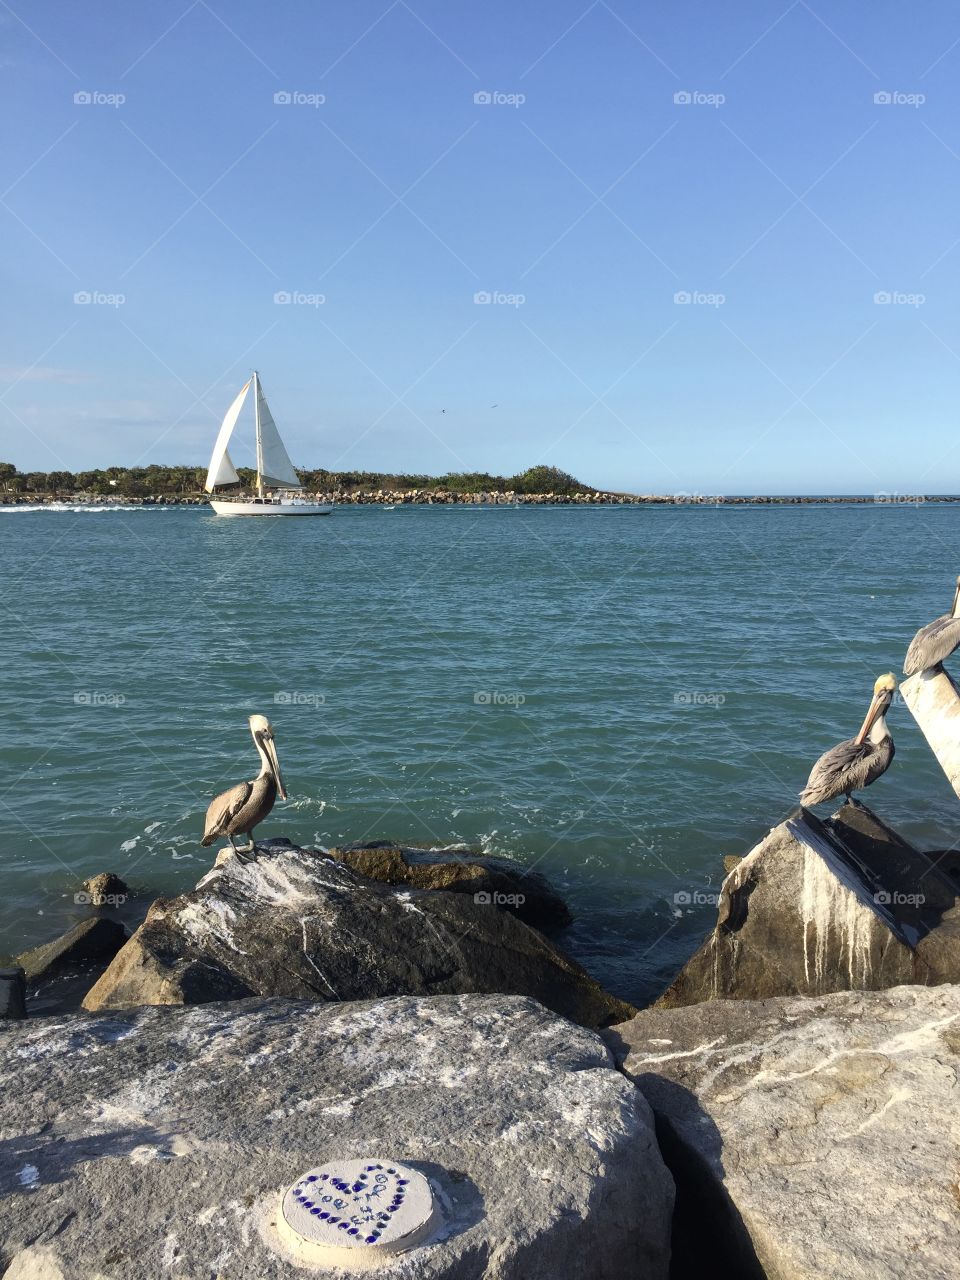 Peaceful water scene with sailboat and pelican and rocks